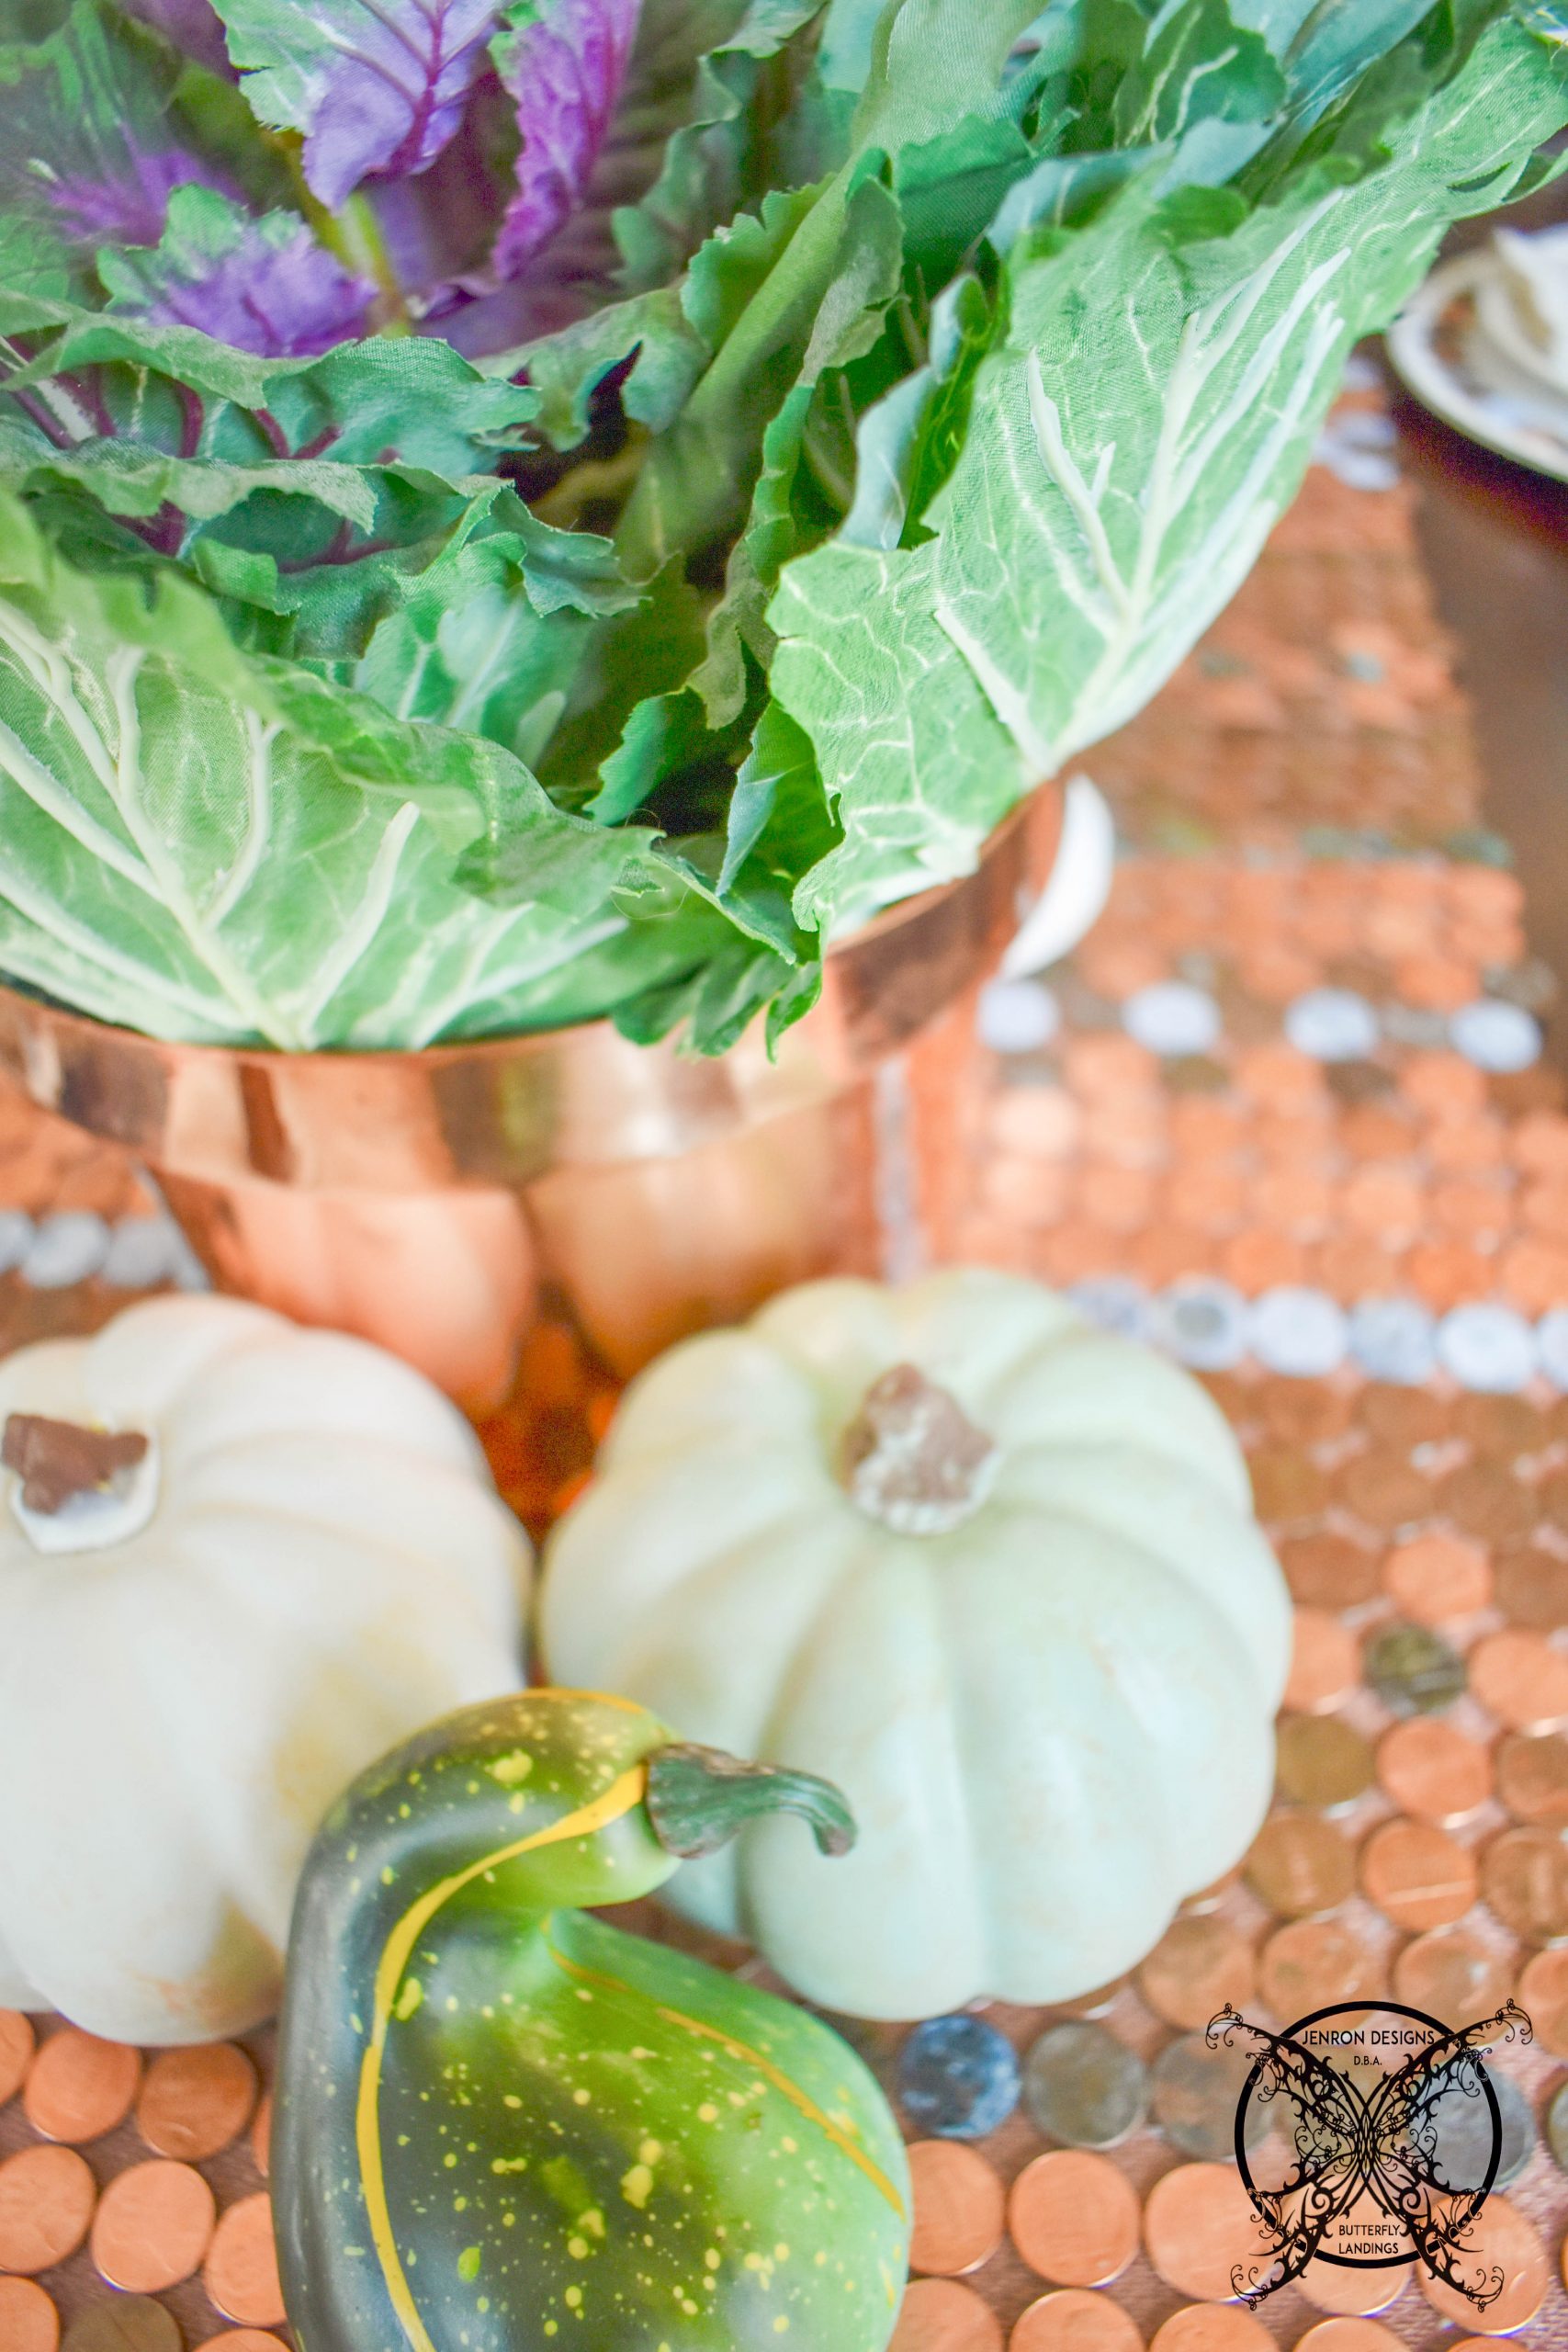 Silk Kale and Pumpkin for Fall JENRON DESIGNS